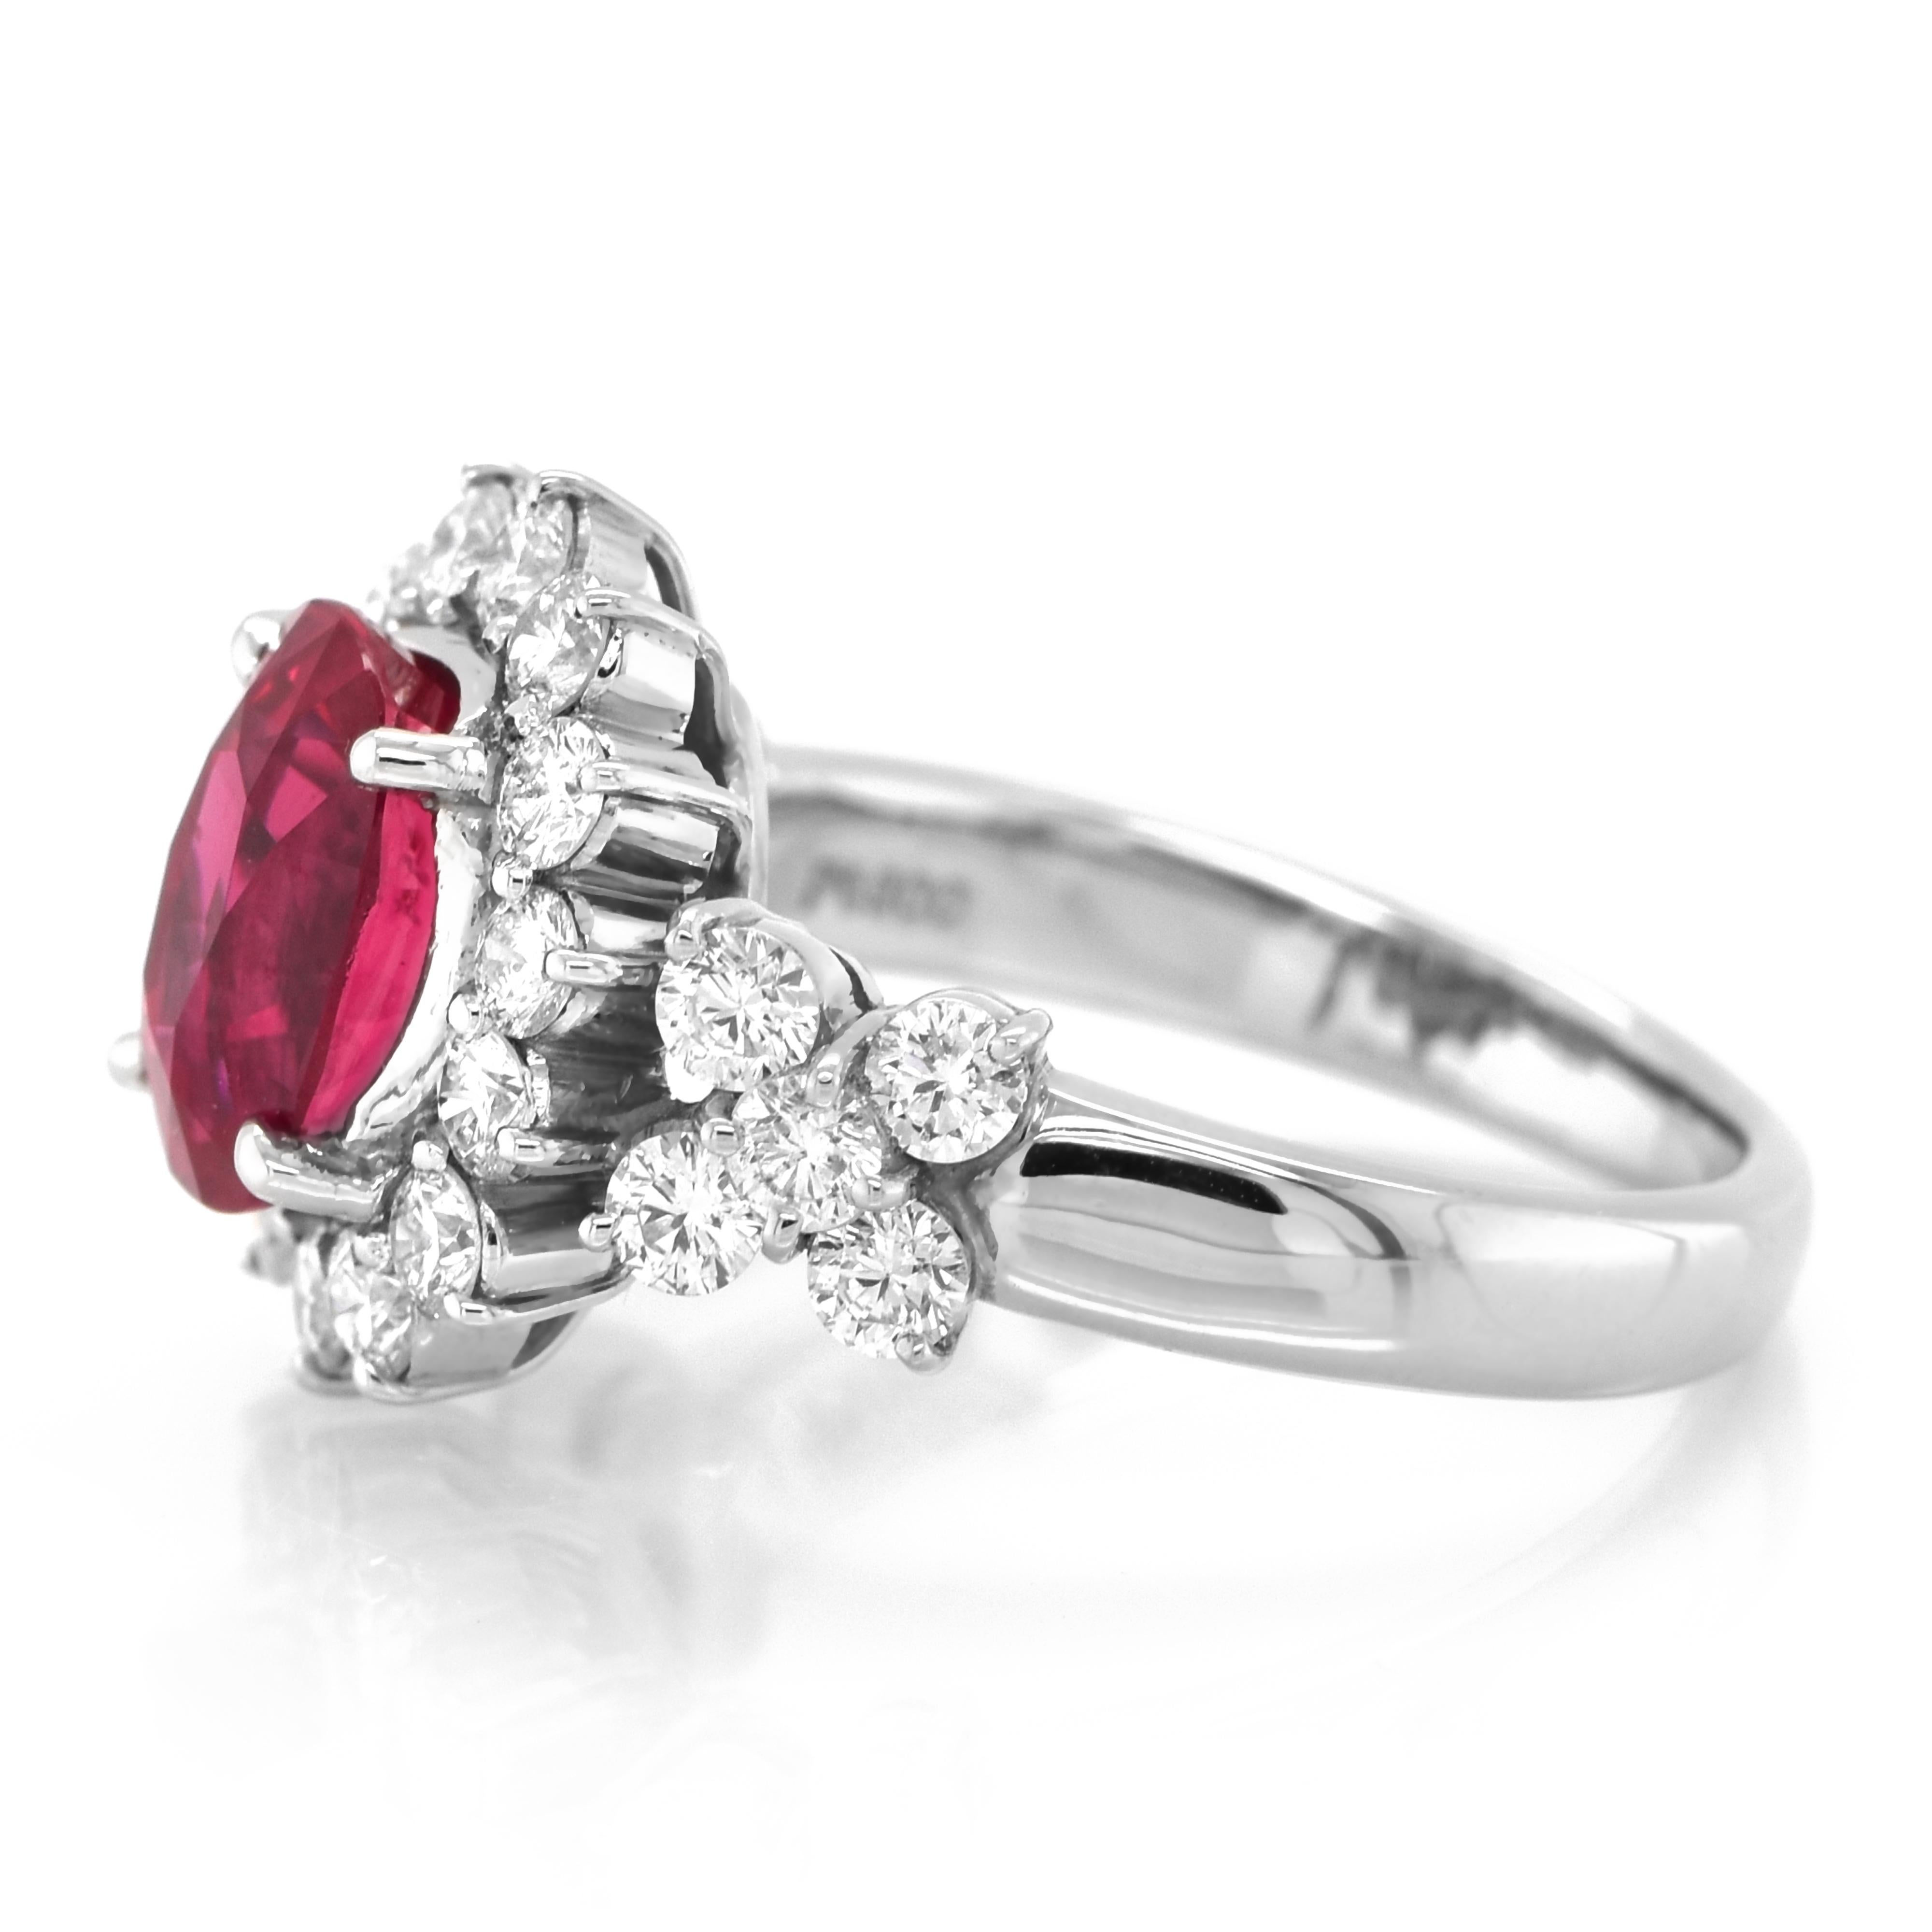 Modern GIA Certified 3.08 Carat Natural African Ruby and Diamond Ring Set in Platinum